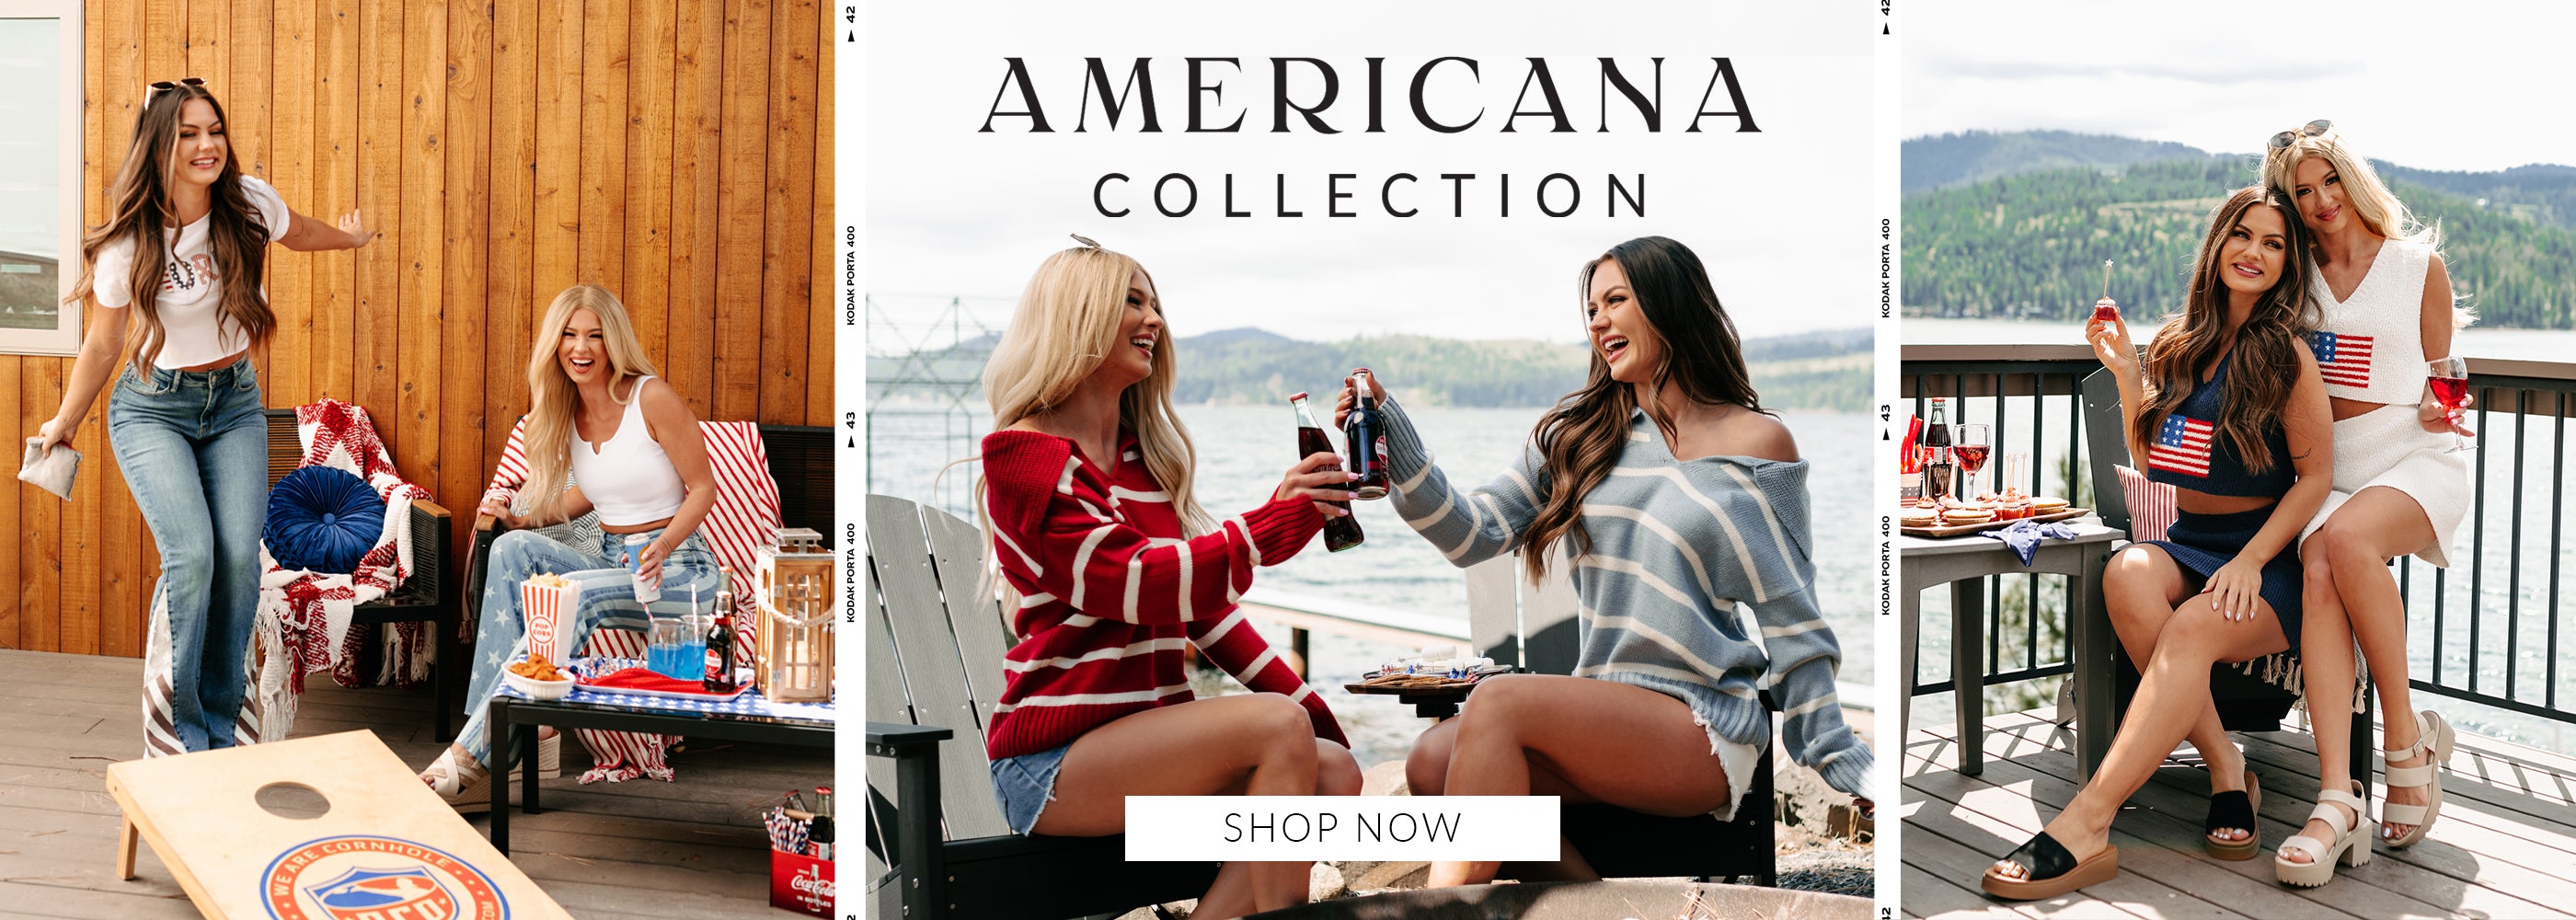 collage of models wearing red, white and blue outfits. Headline says "Americana Collection" Call to action says "shop now" and links to the 4th of July Collection.